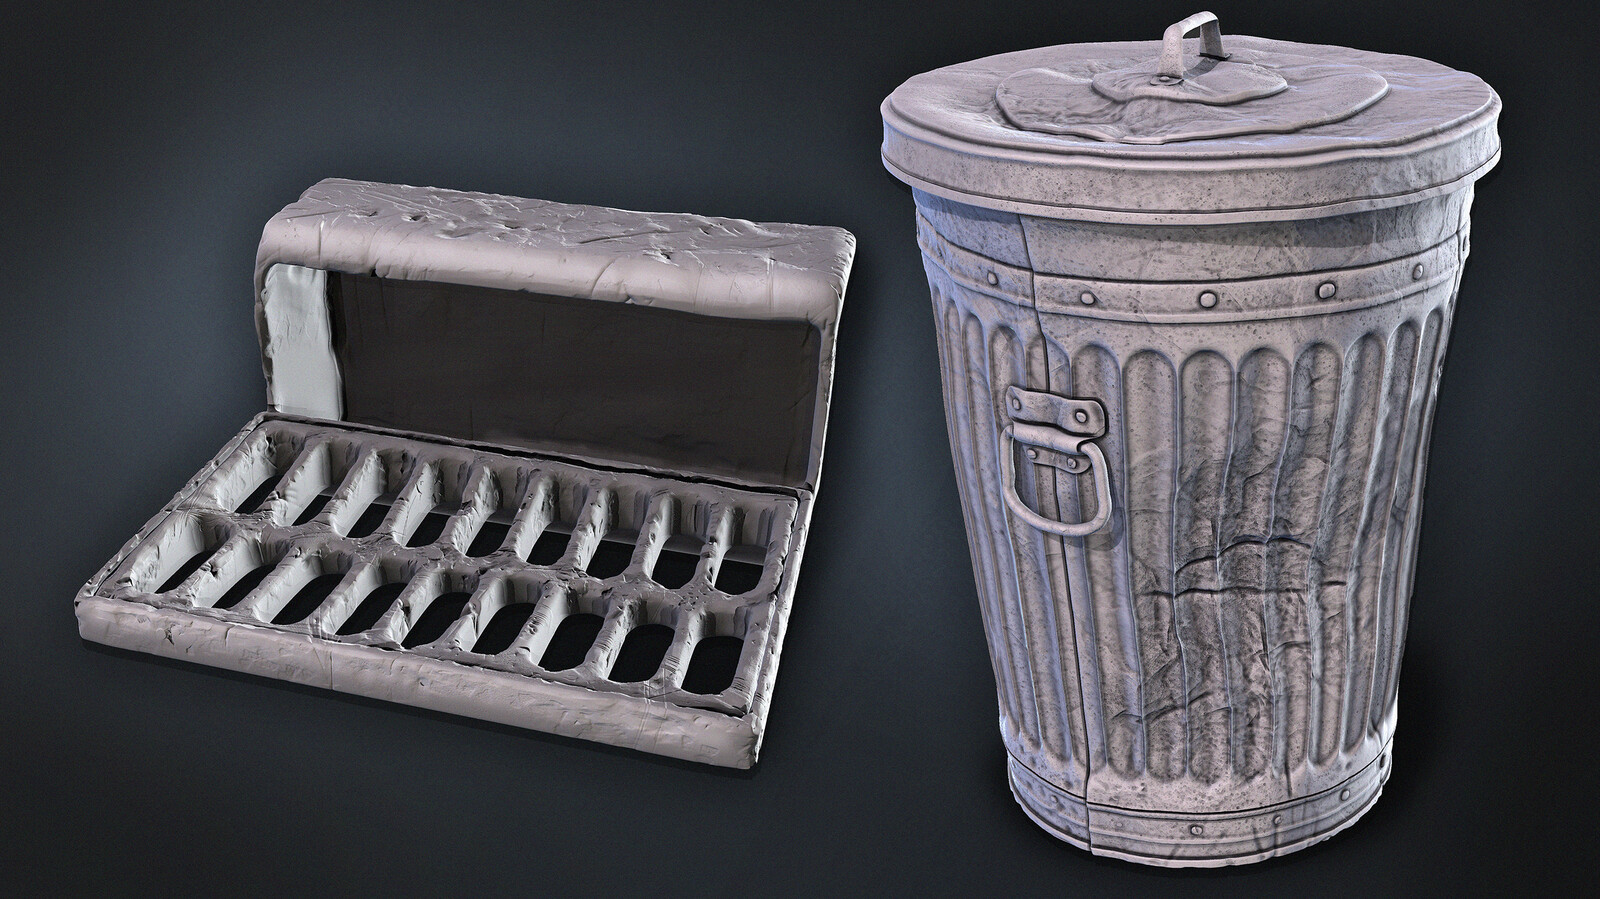 Some of the 3d props i just did them from scratch. No need to do photogrammetry on such things :), also i could not find such garbage bin.